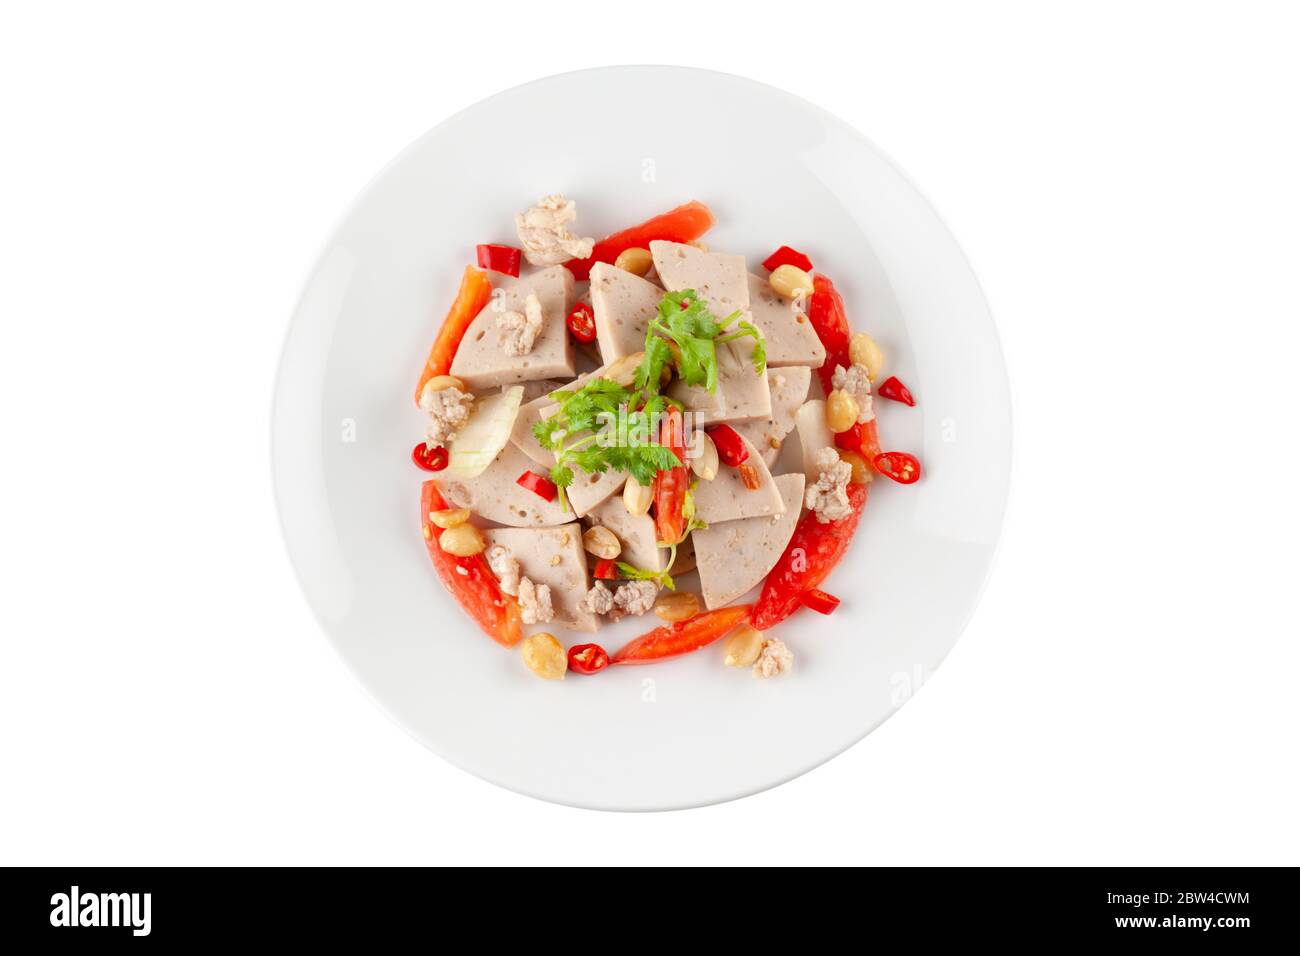 Spicy Vietnamese Sausage Salad on white ceramic plate isolated on white background with clipping path Stock Photo